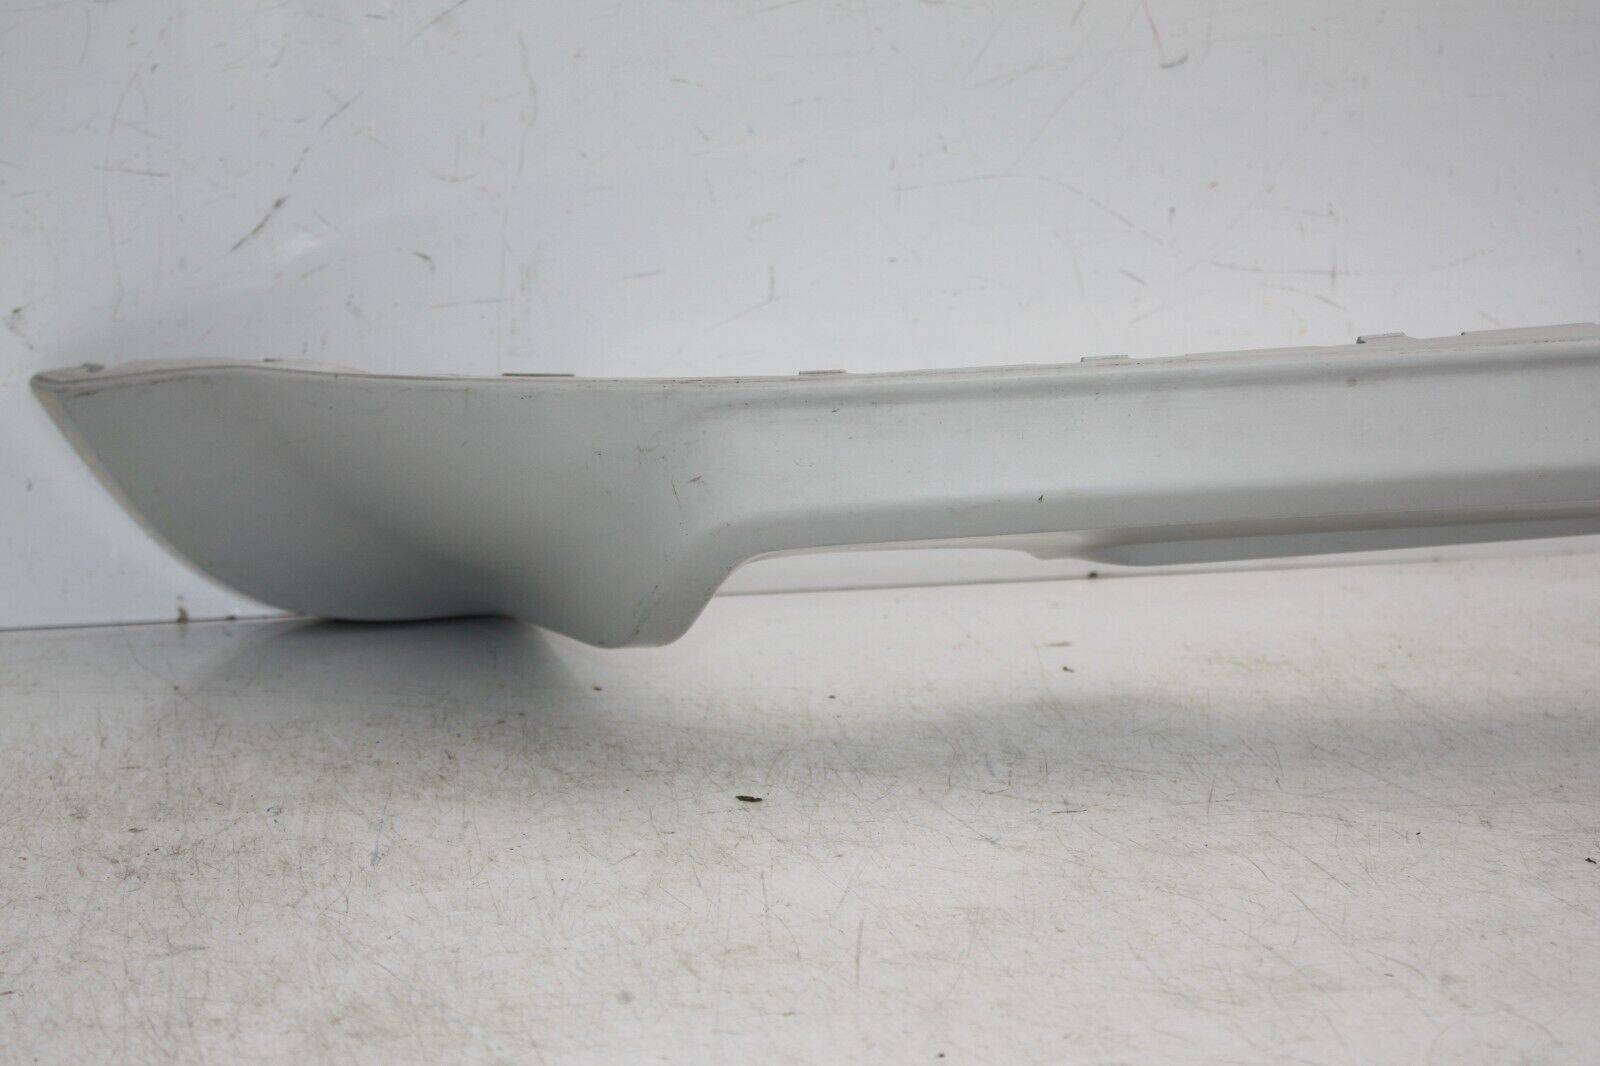 Ford-C-Max-Rear-Bumper-skirt-2004-To-2007-3M5J17B891AAW-175367535992-2